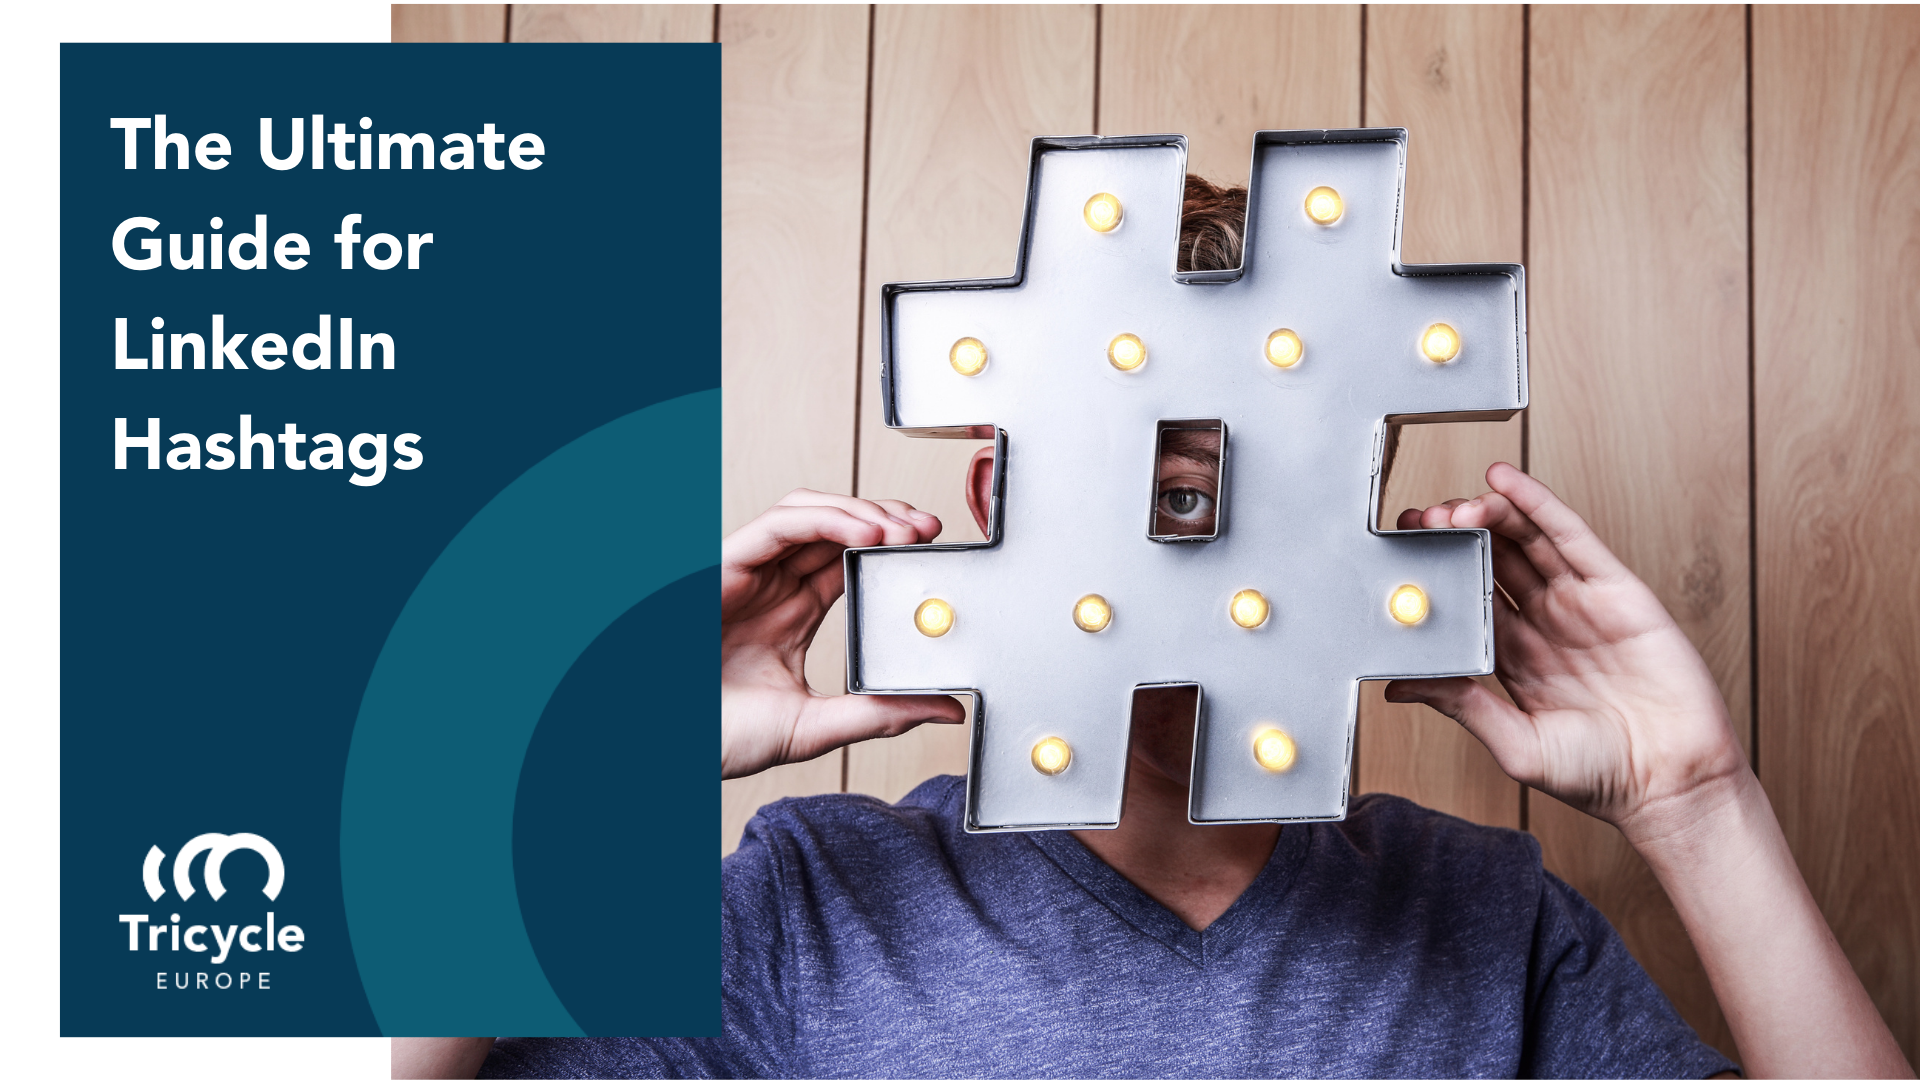 The Ultimate Guide for LinkedIn Hashtags